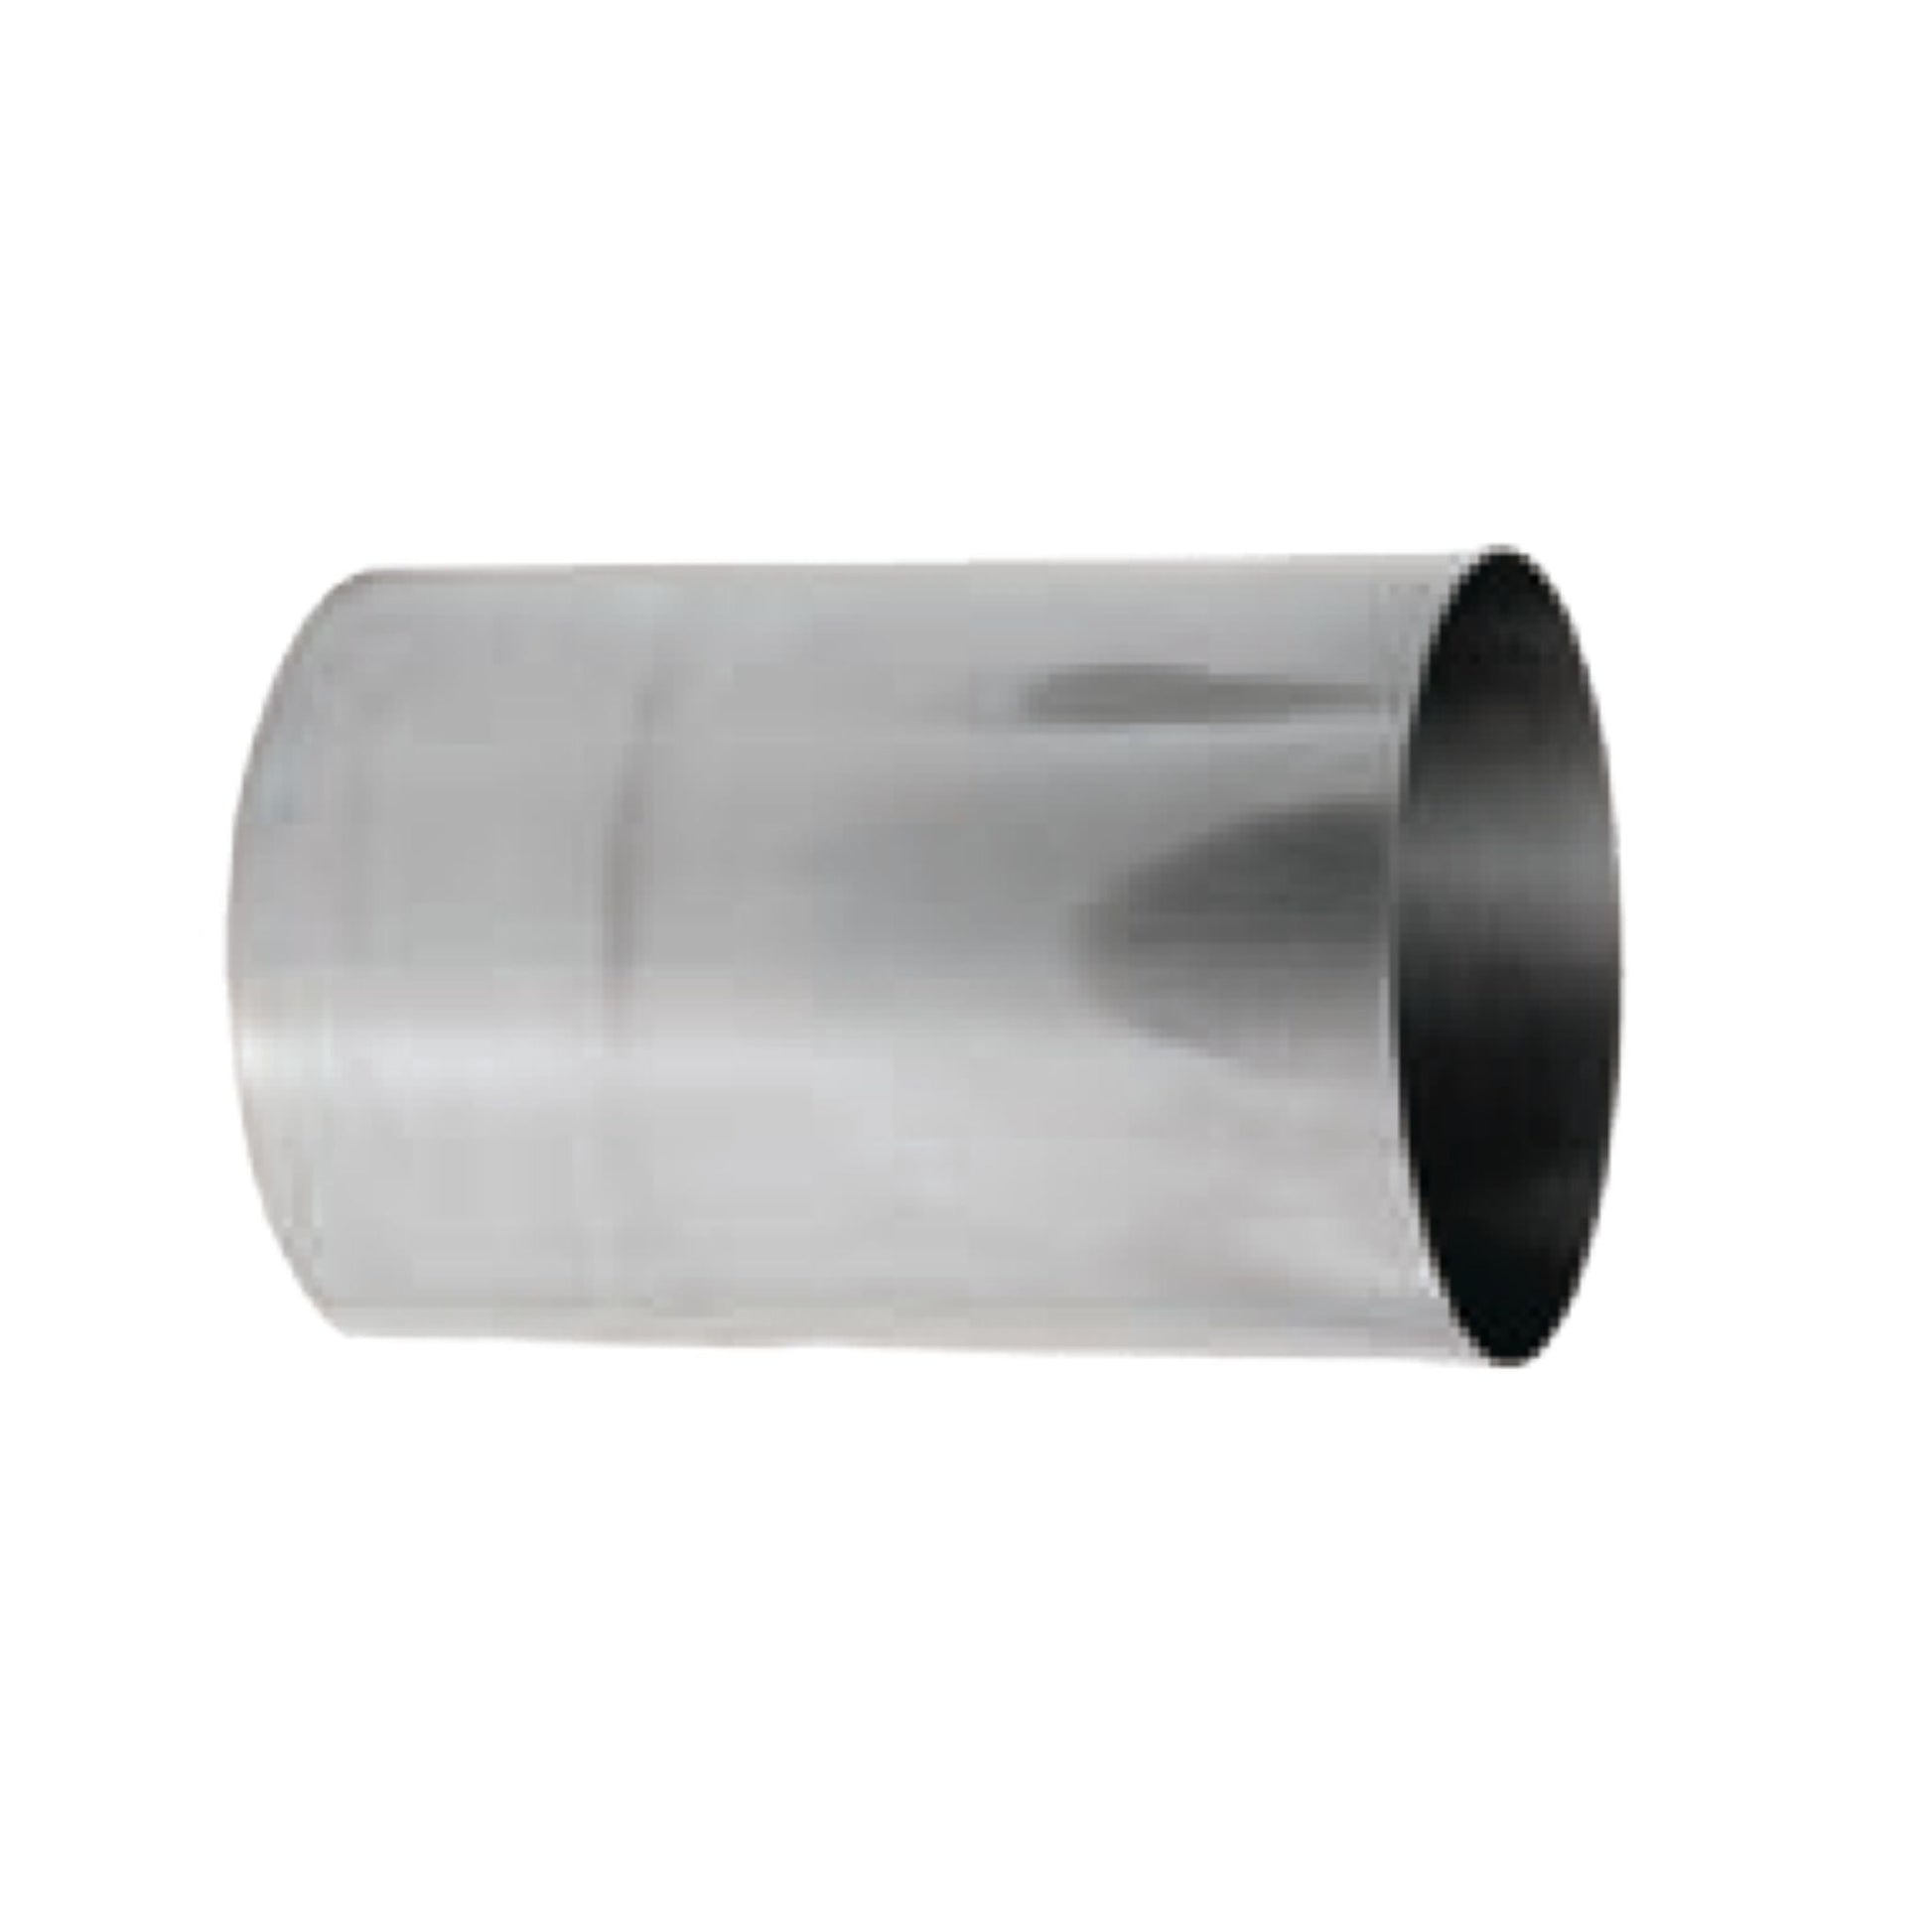 DuraVent FasNSeal 16" 29-4C Stainless Steel Wall Thimble Sleeve Extension